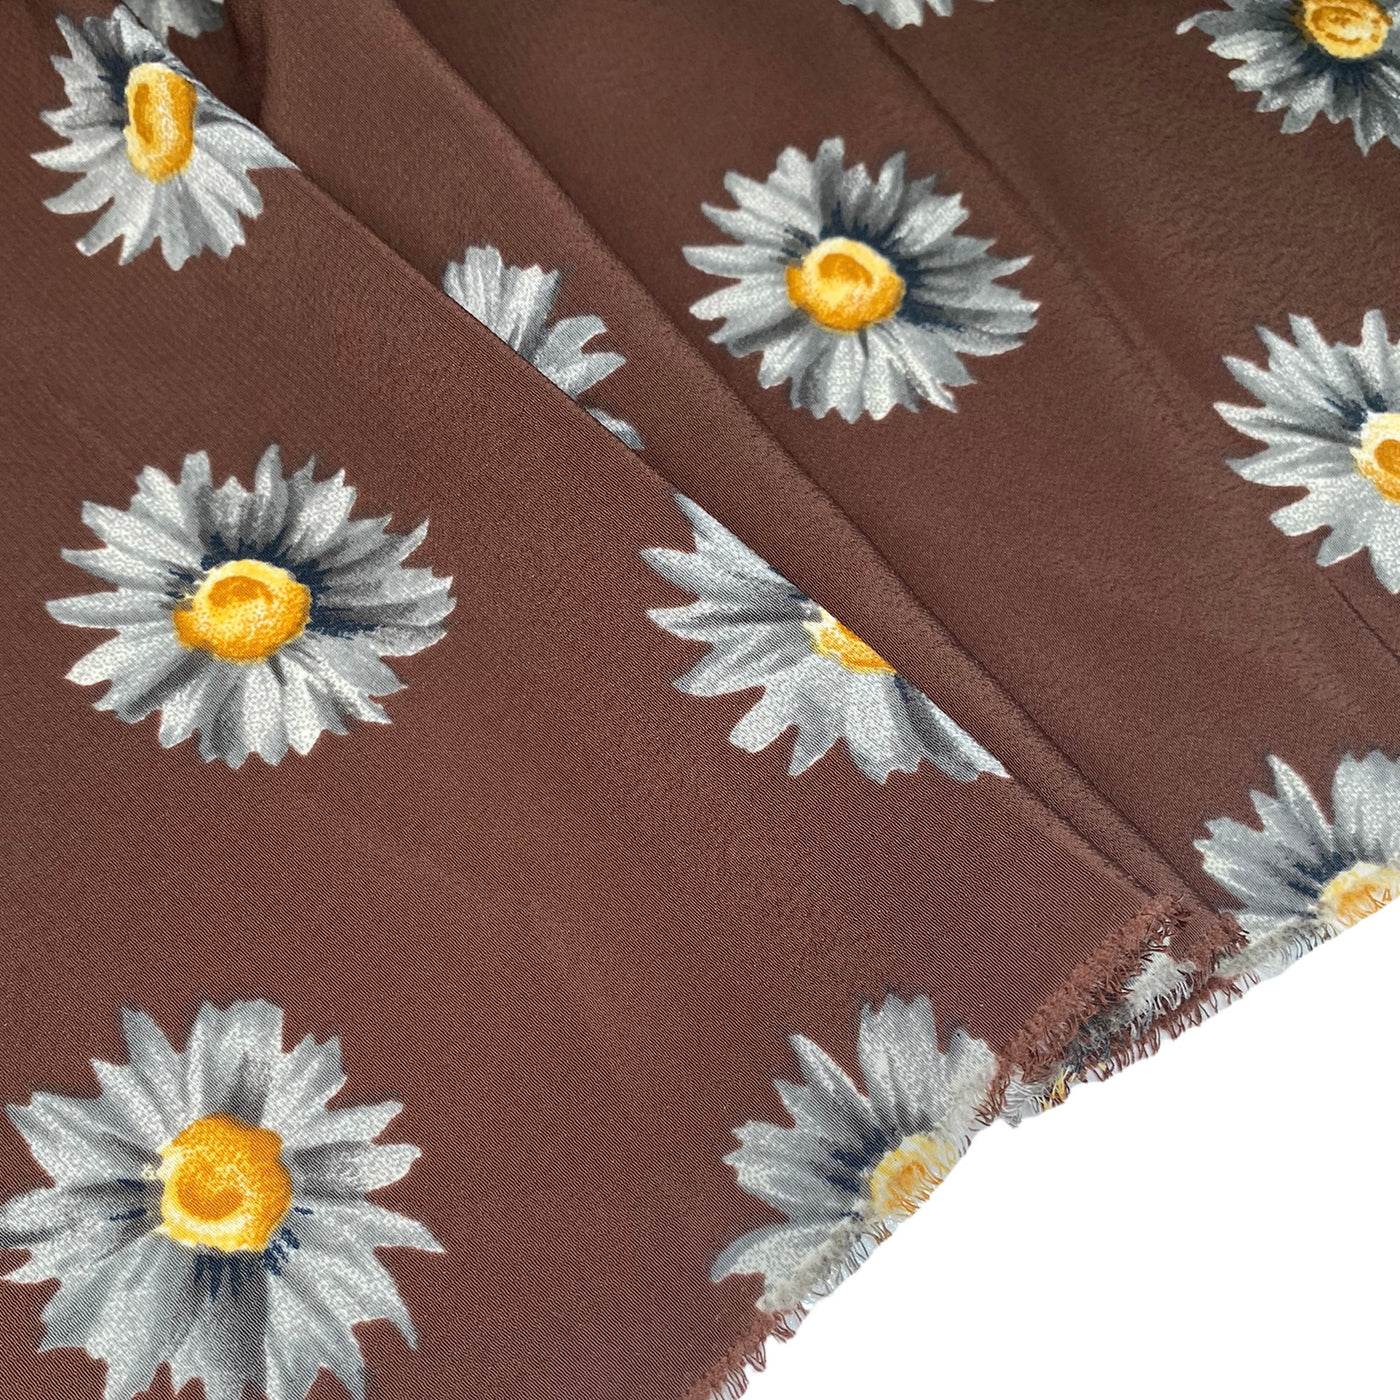 Floral Printed Polyester Crepe Chiffon - 44” - Brown